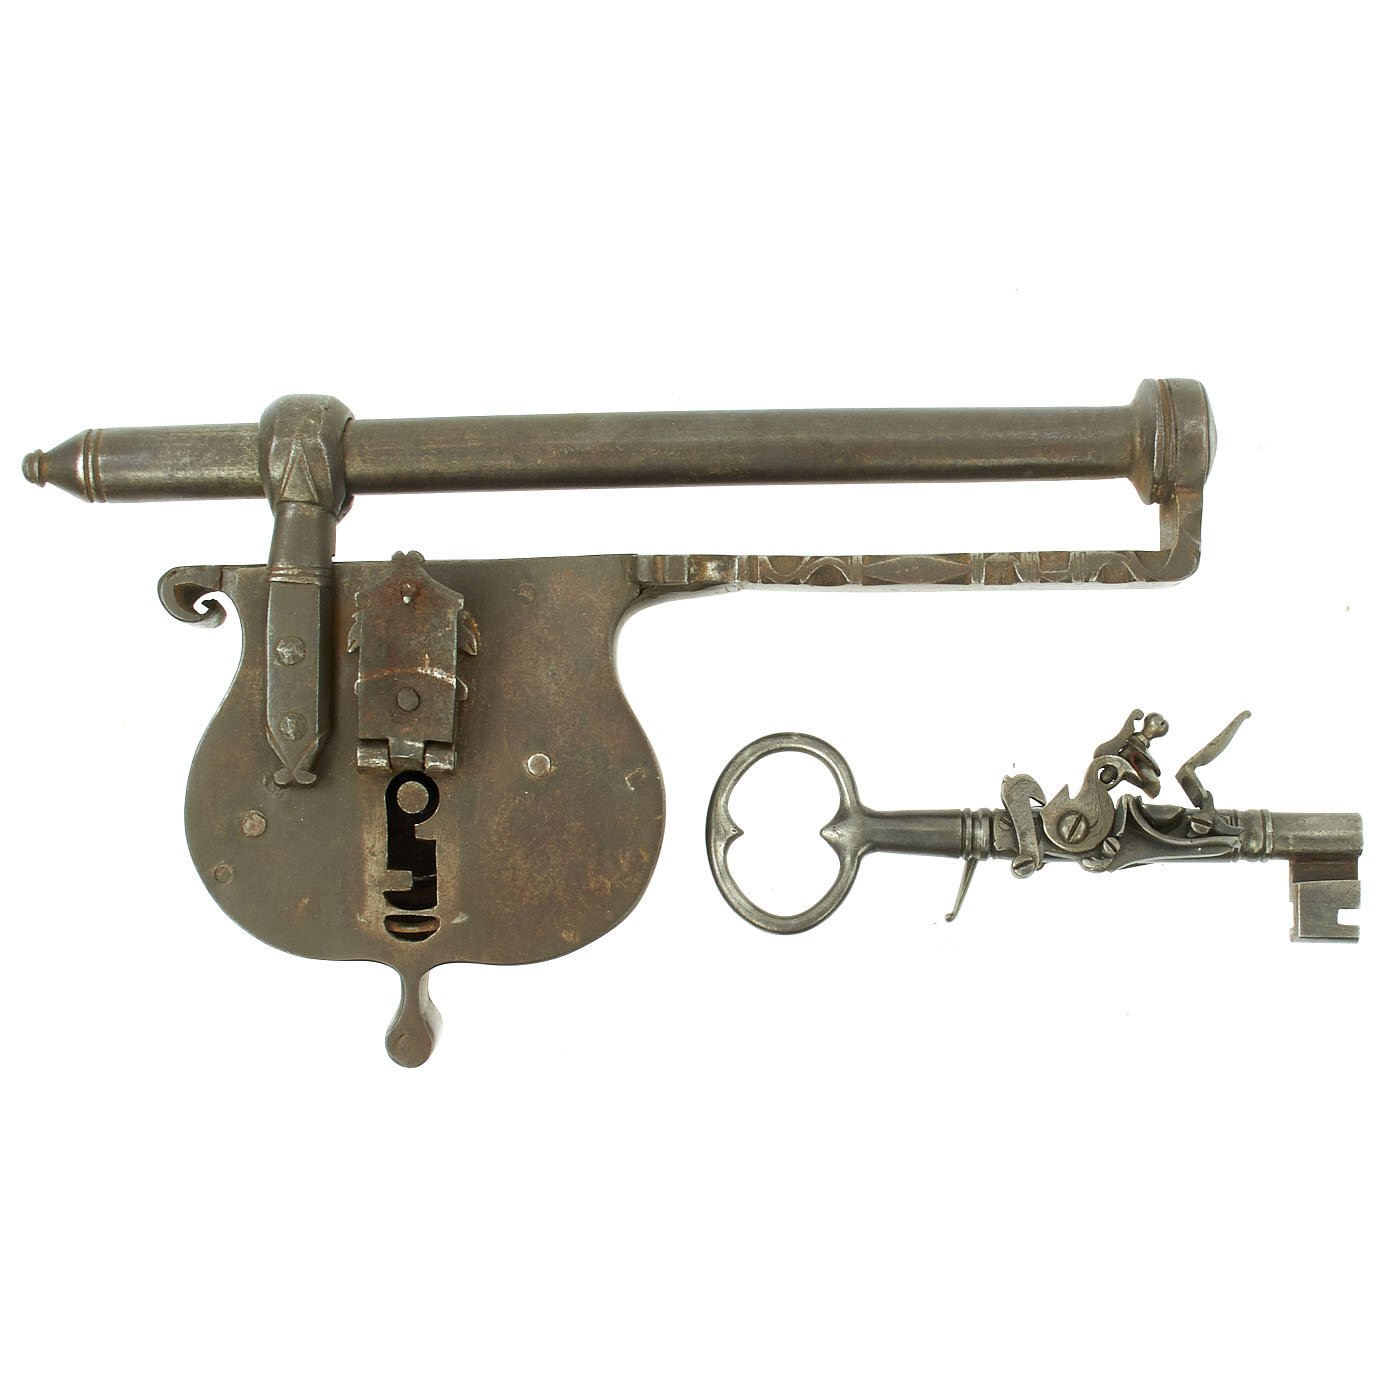 I have to share that, never seen such a key before. From a purchased bundle  (): old »Guri Padlock« from East Germany (GDR, 1950 – 1960) w/steel  body and shackle and flat